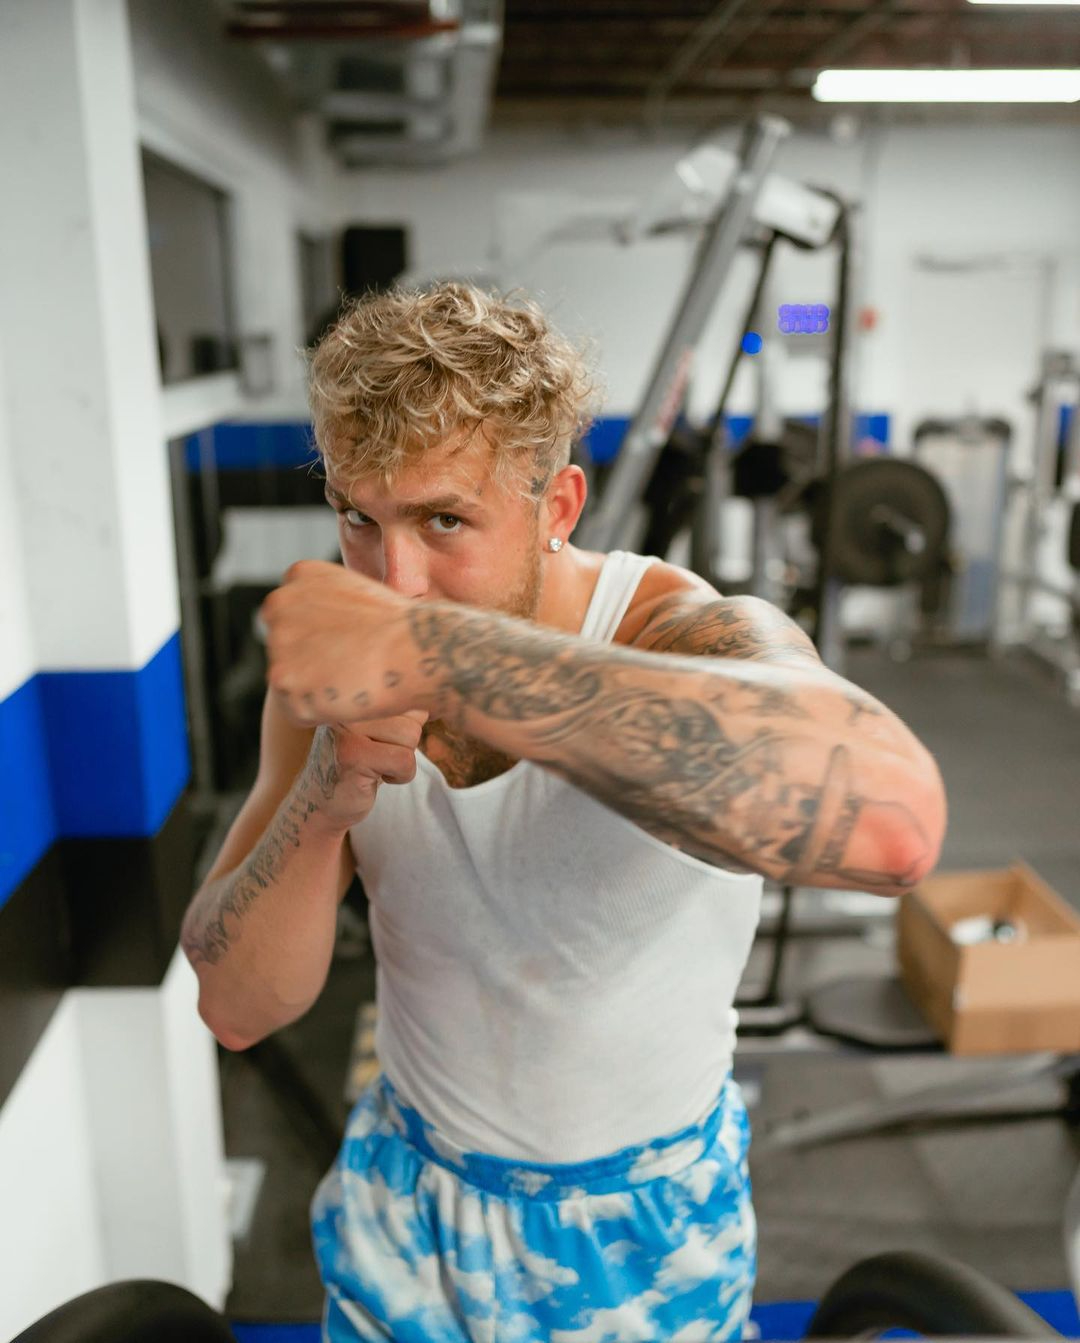 Jake Paul shows off his bulked-up physique in behind-the scenes training photos